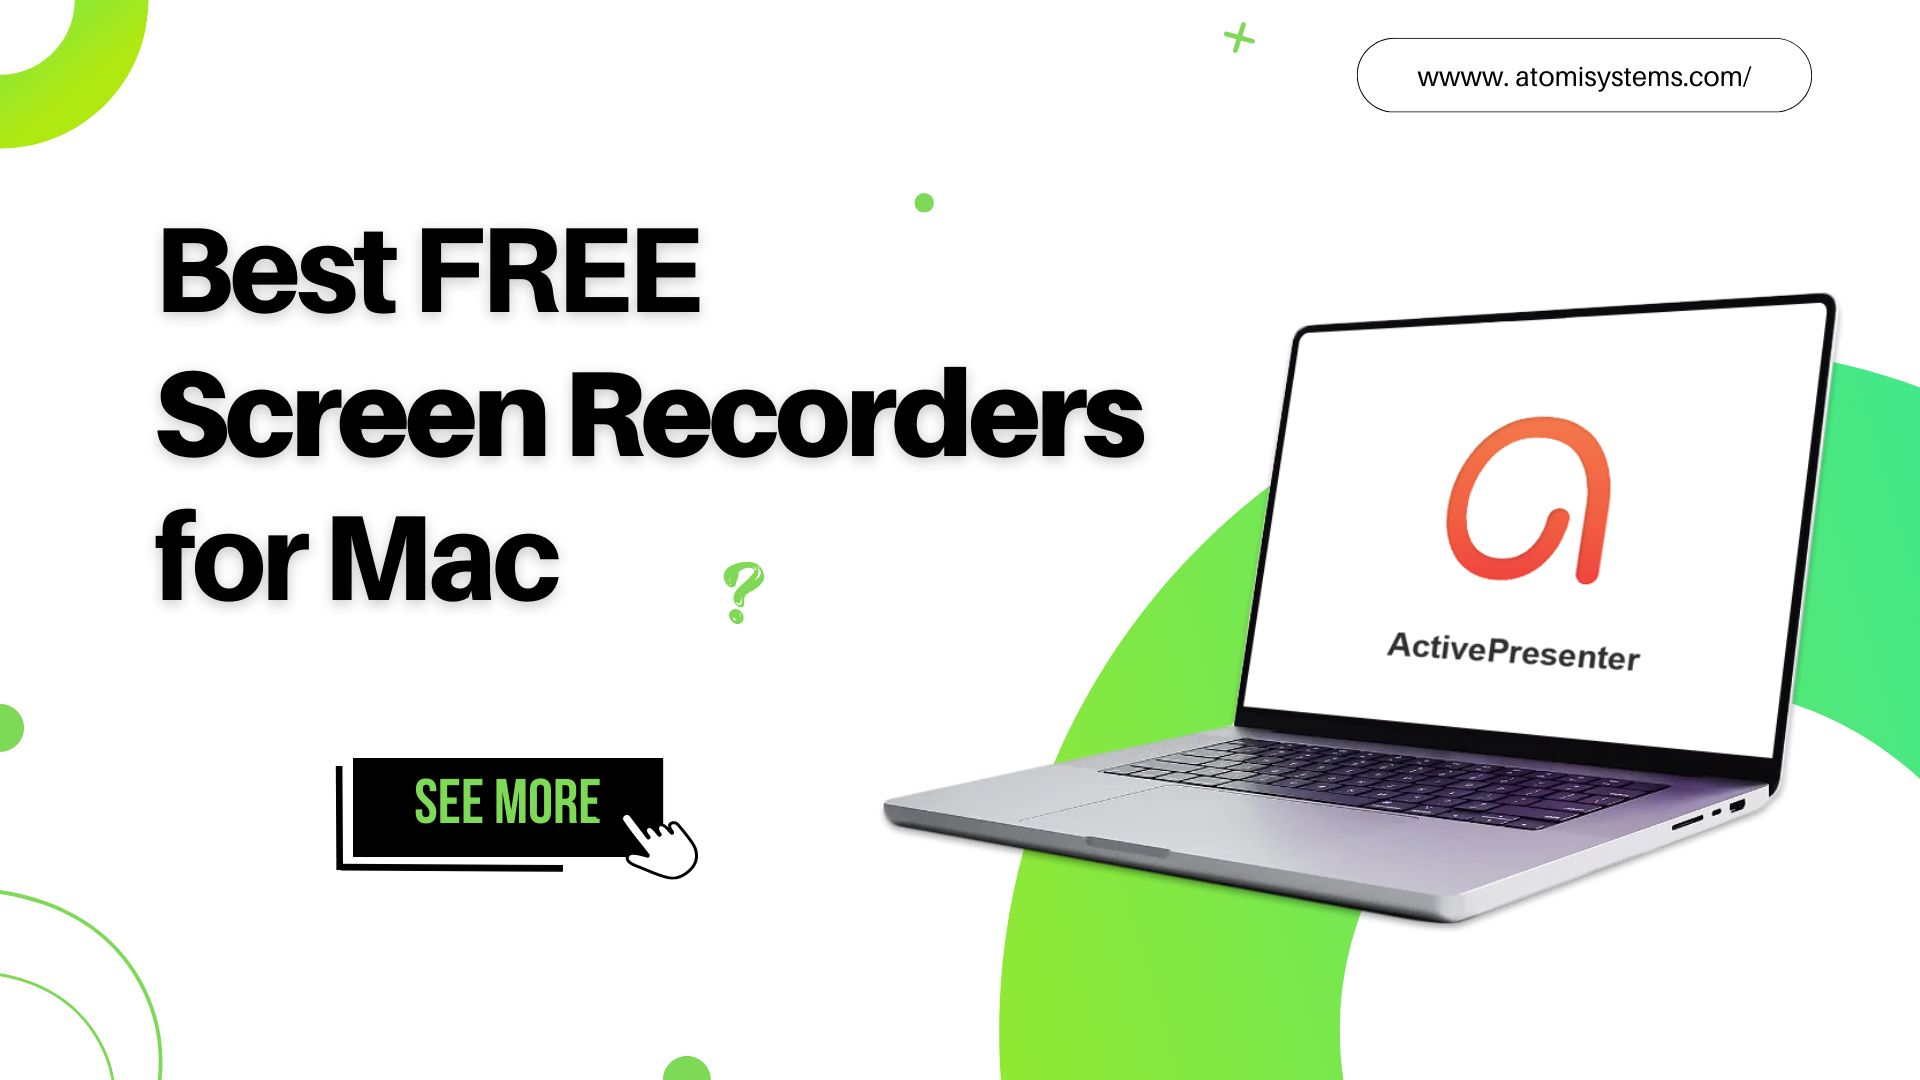 Best FREE Screen Recorders for Mac featured image